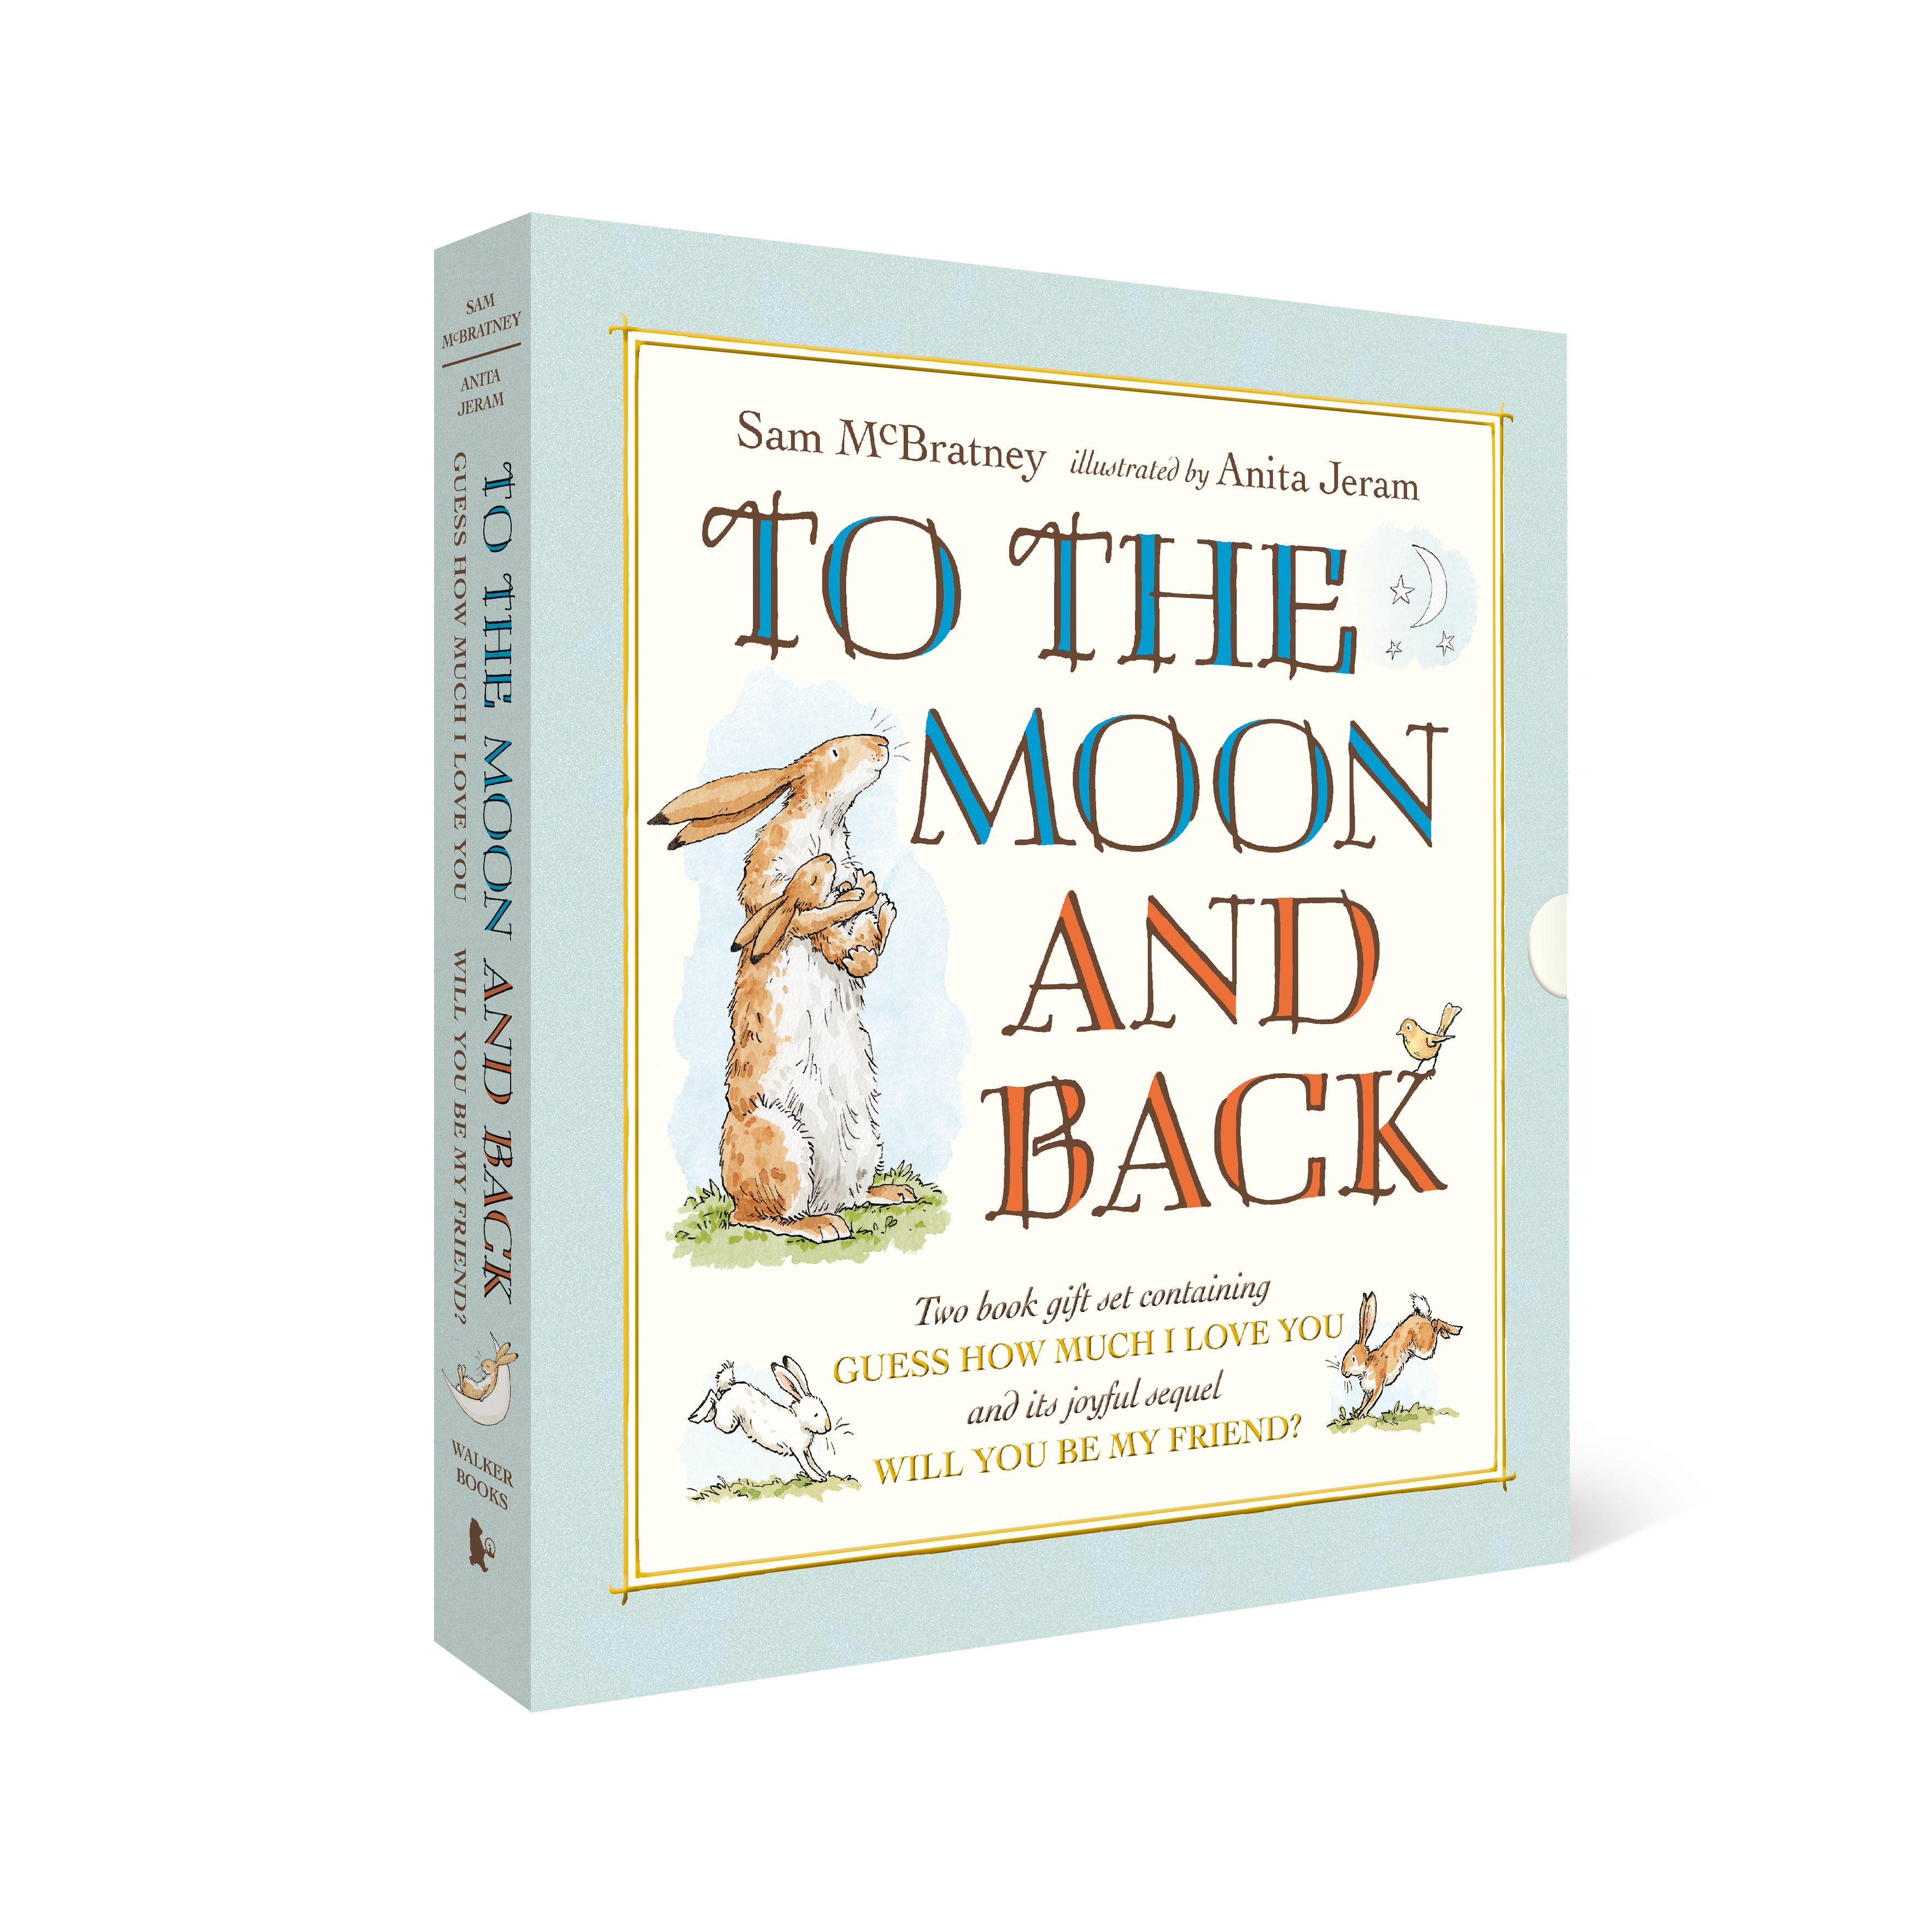 To-the-Moon-and-Back-Guess-How-Much-I-Love-You-and-Will-You-Be-My-Friend-Slipcase